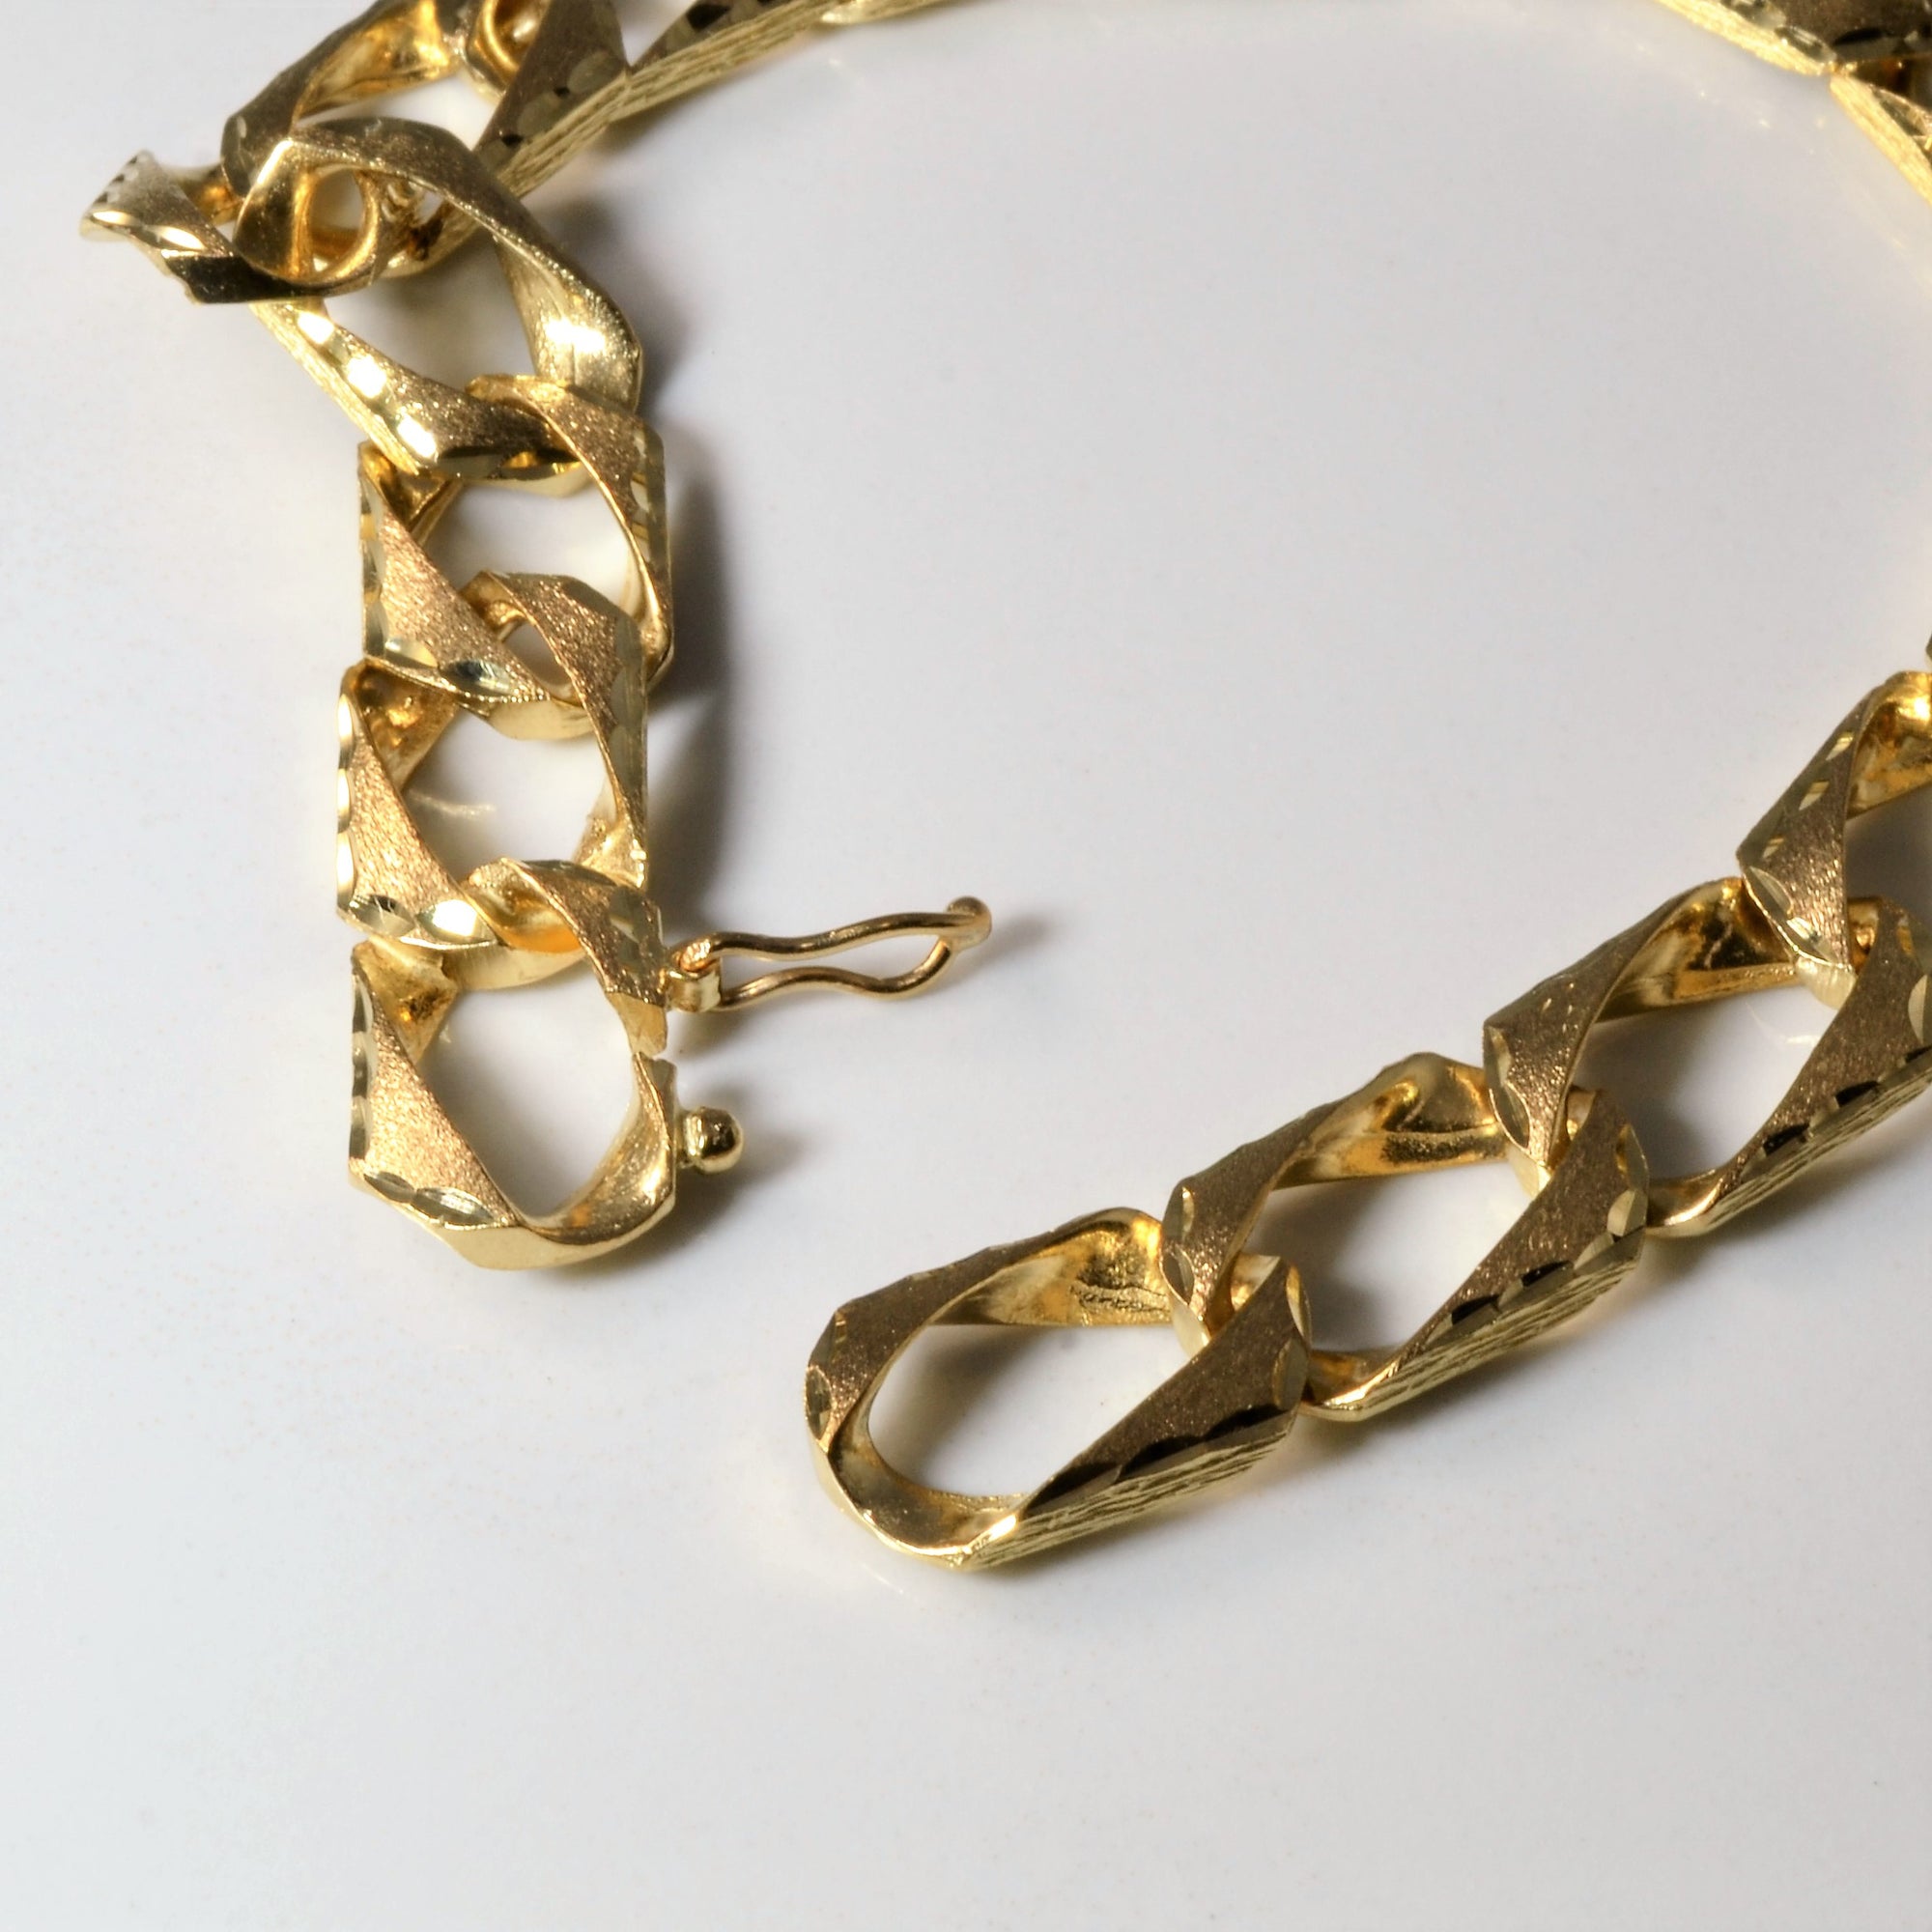 10k Yellow Gold Curb Link Chain Bracelet | 8